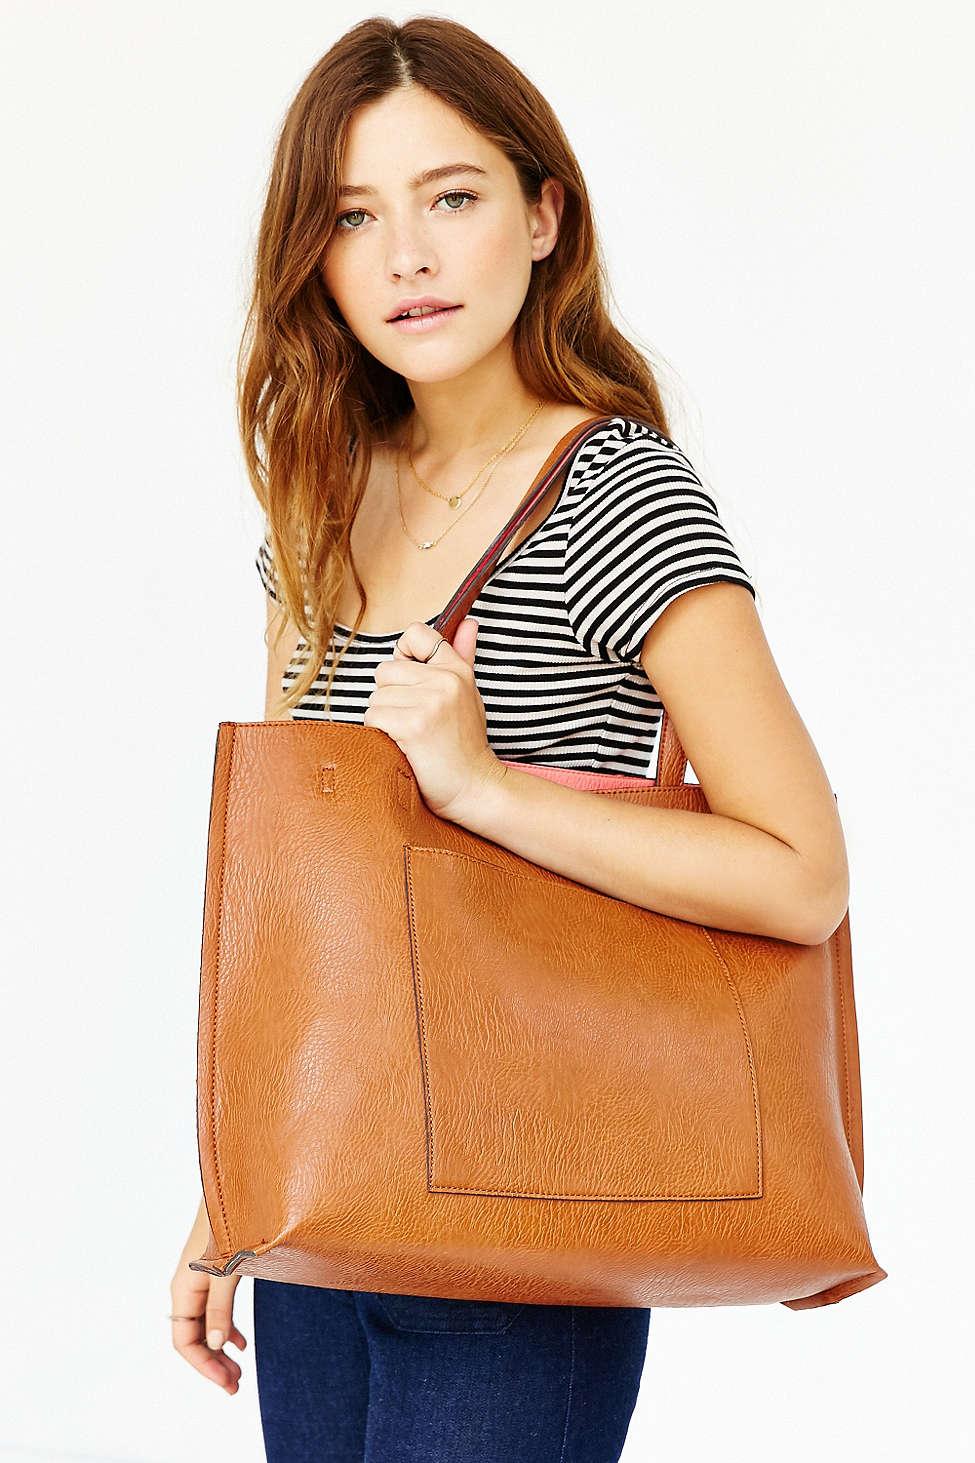 Urban Outfitters Reversible Vegan Leather Tote Bag in Brown/Coral (Brown) - Lyst